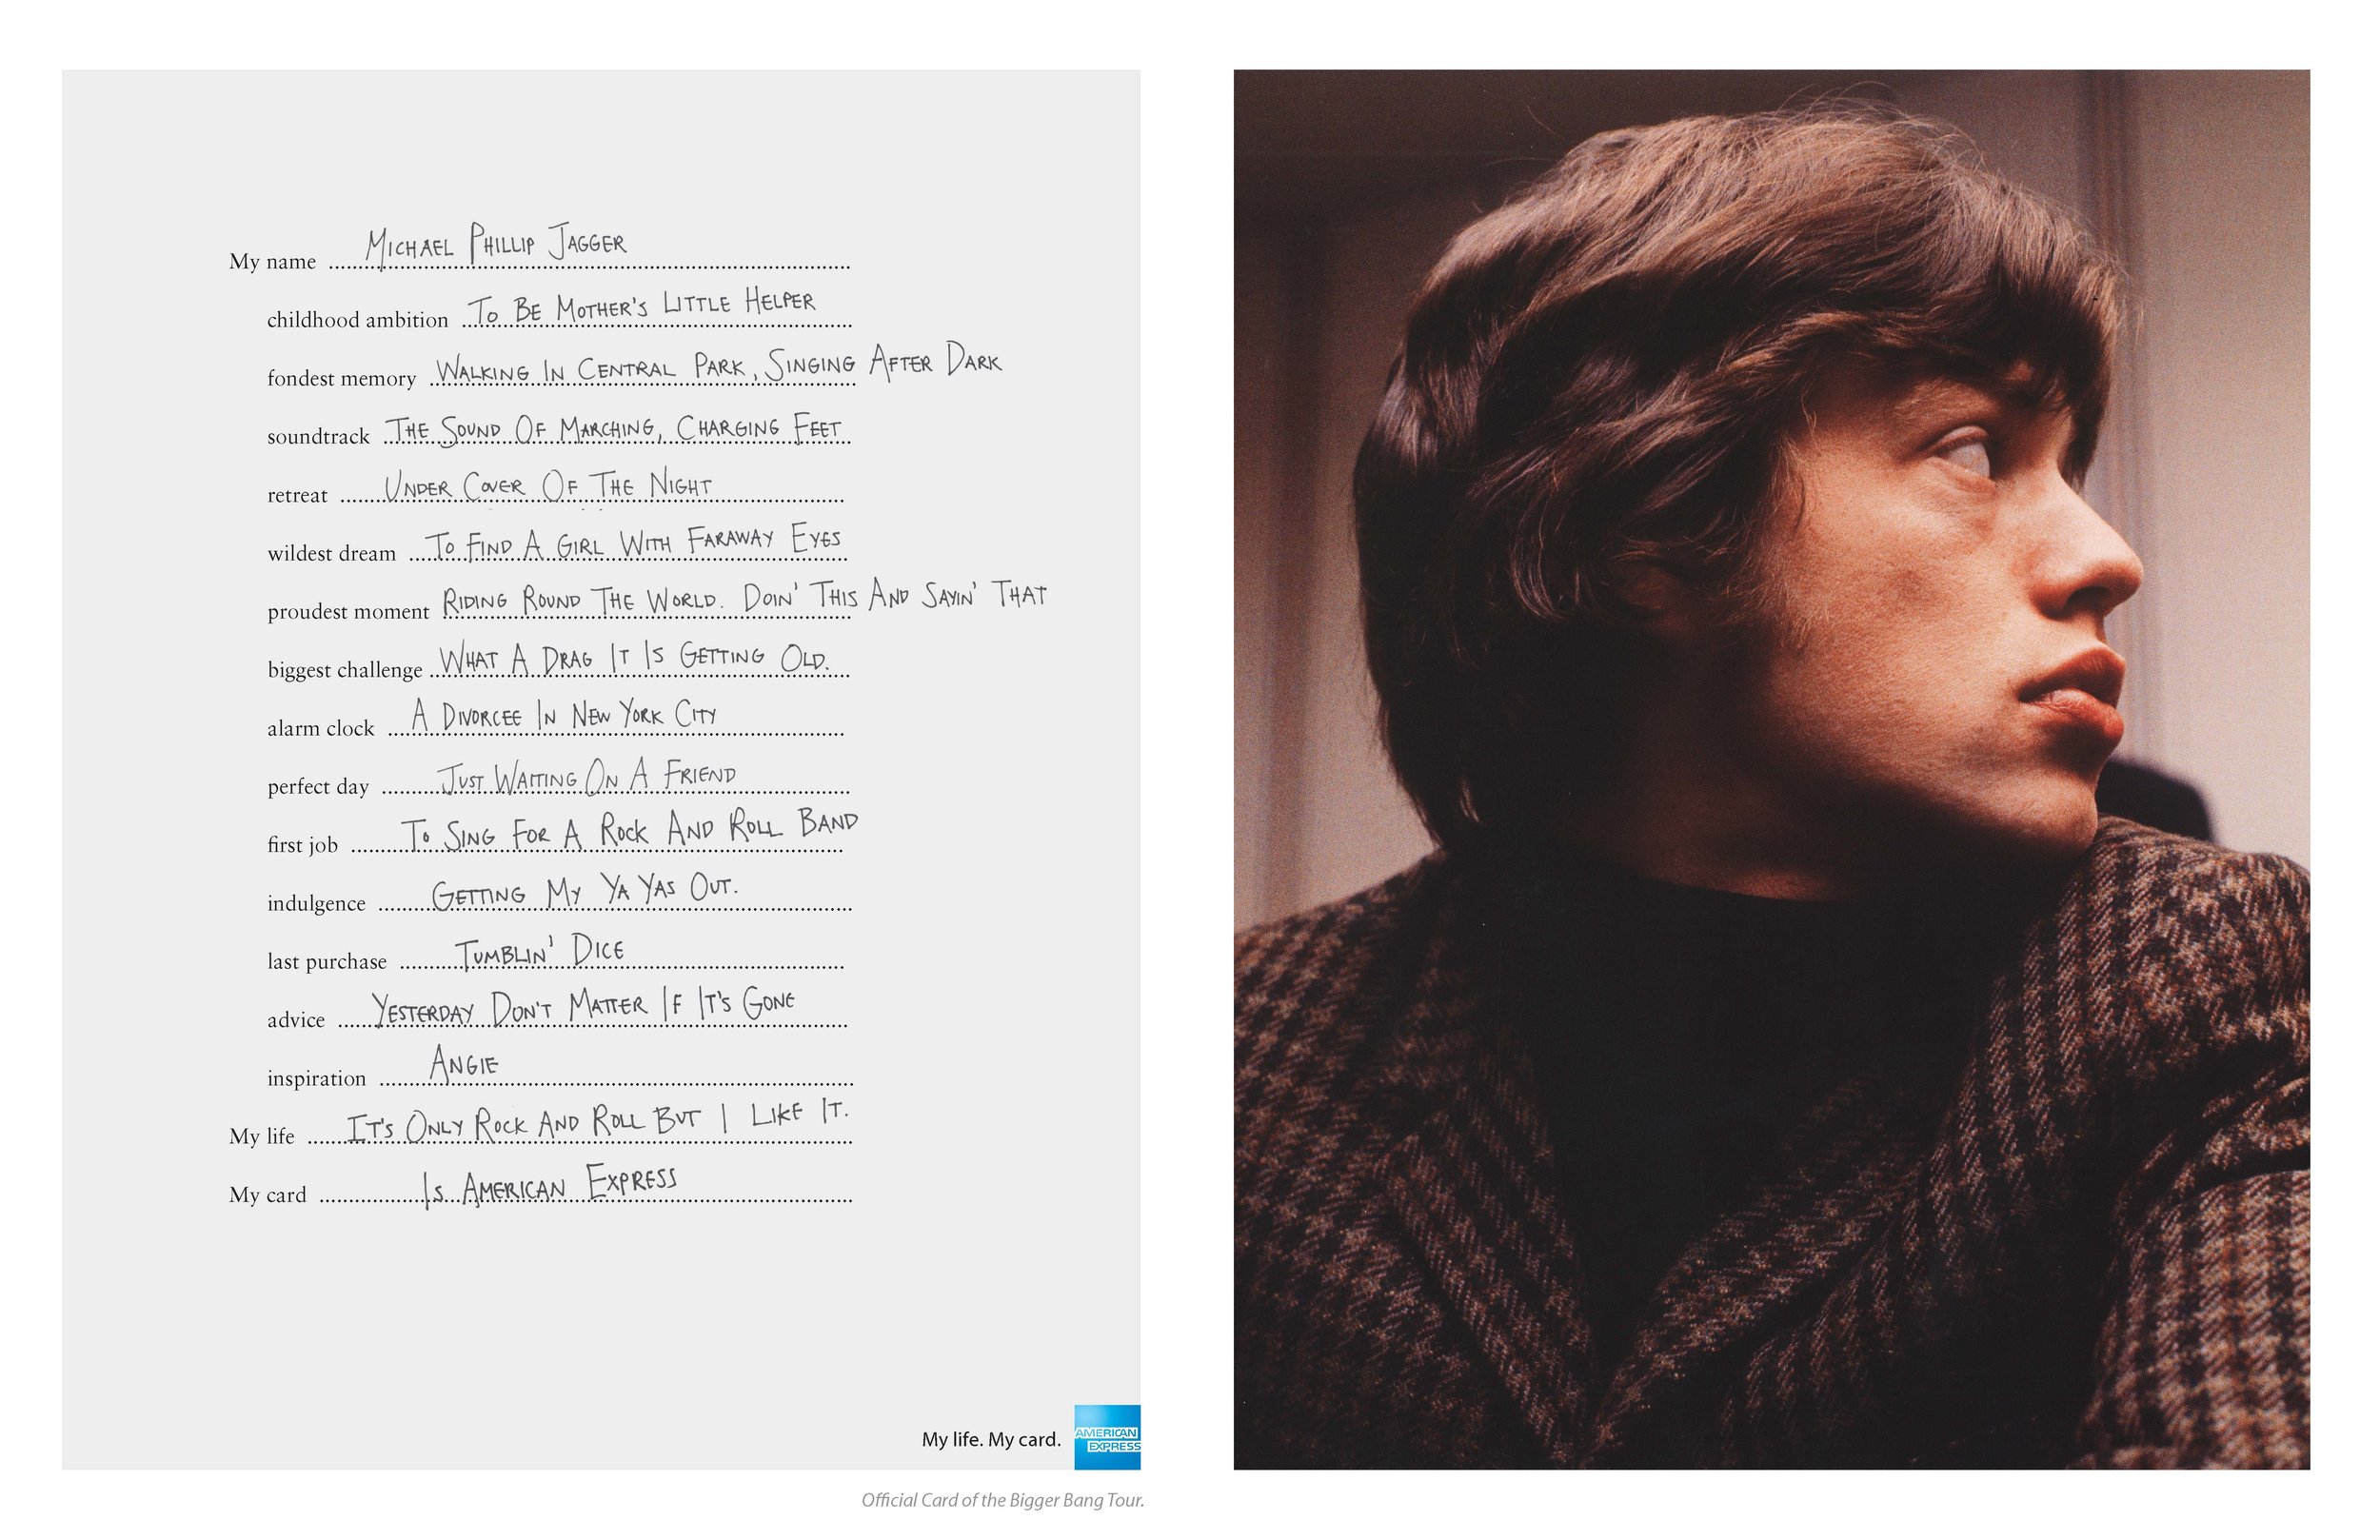 Amex Rolling Stones_Page_1.jpg